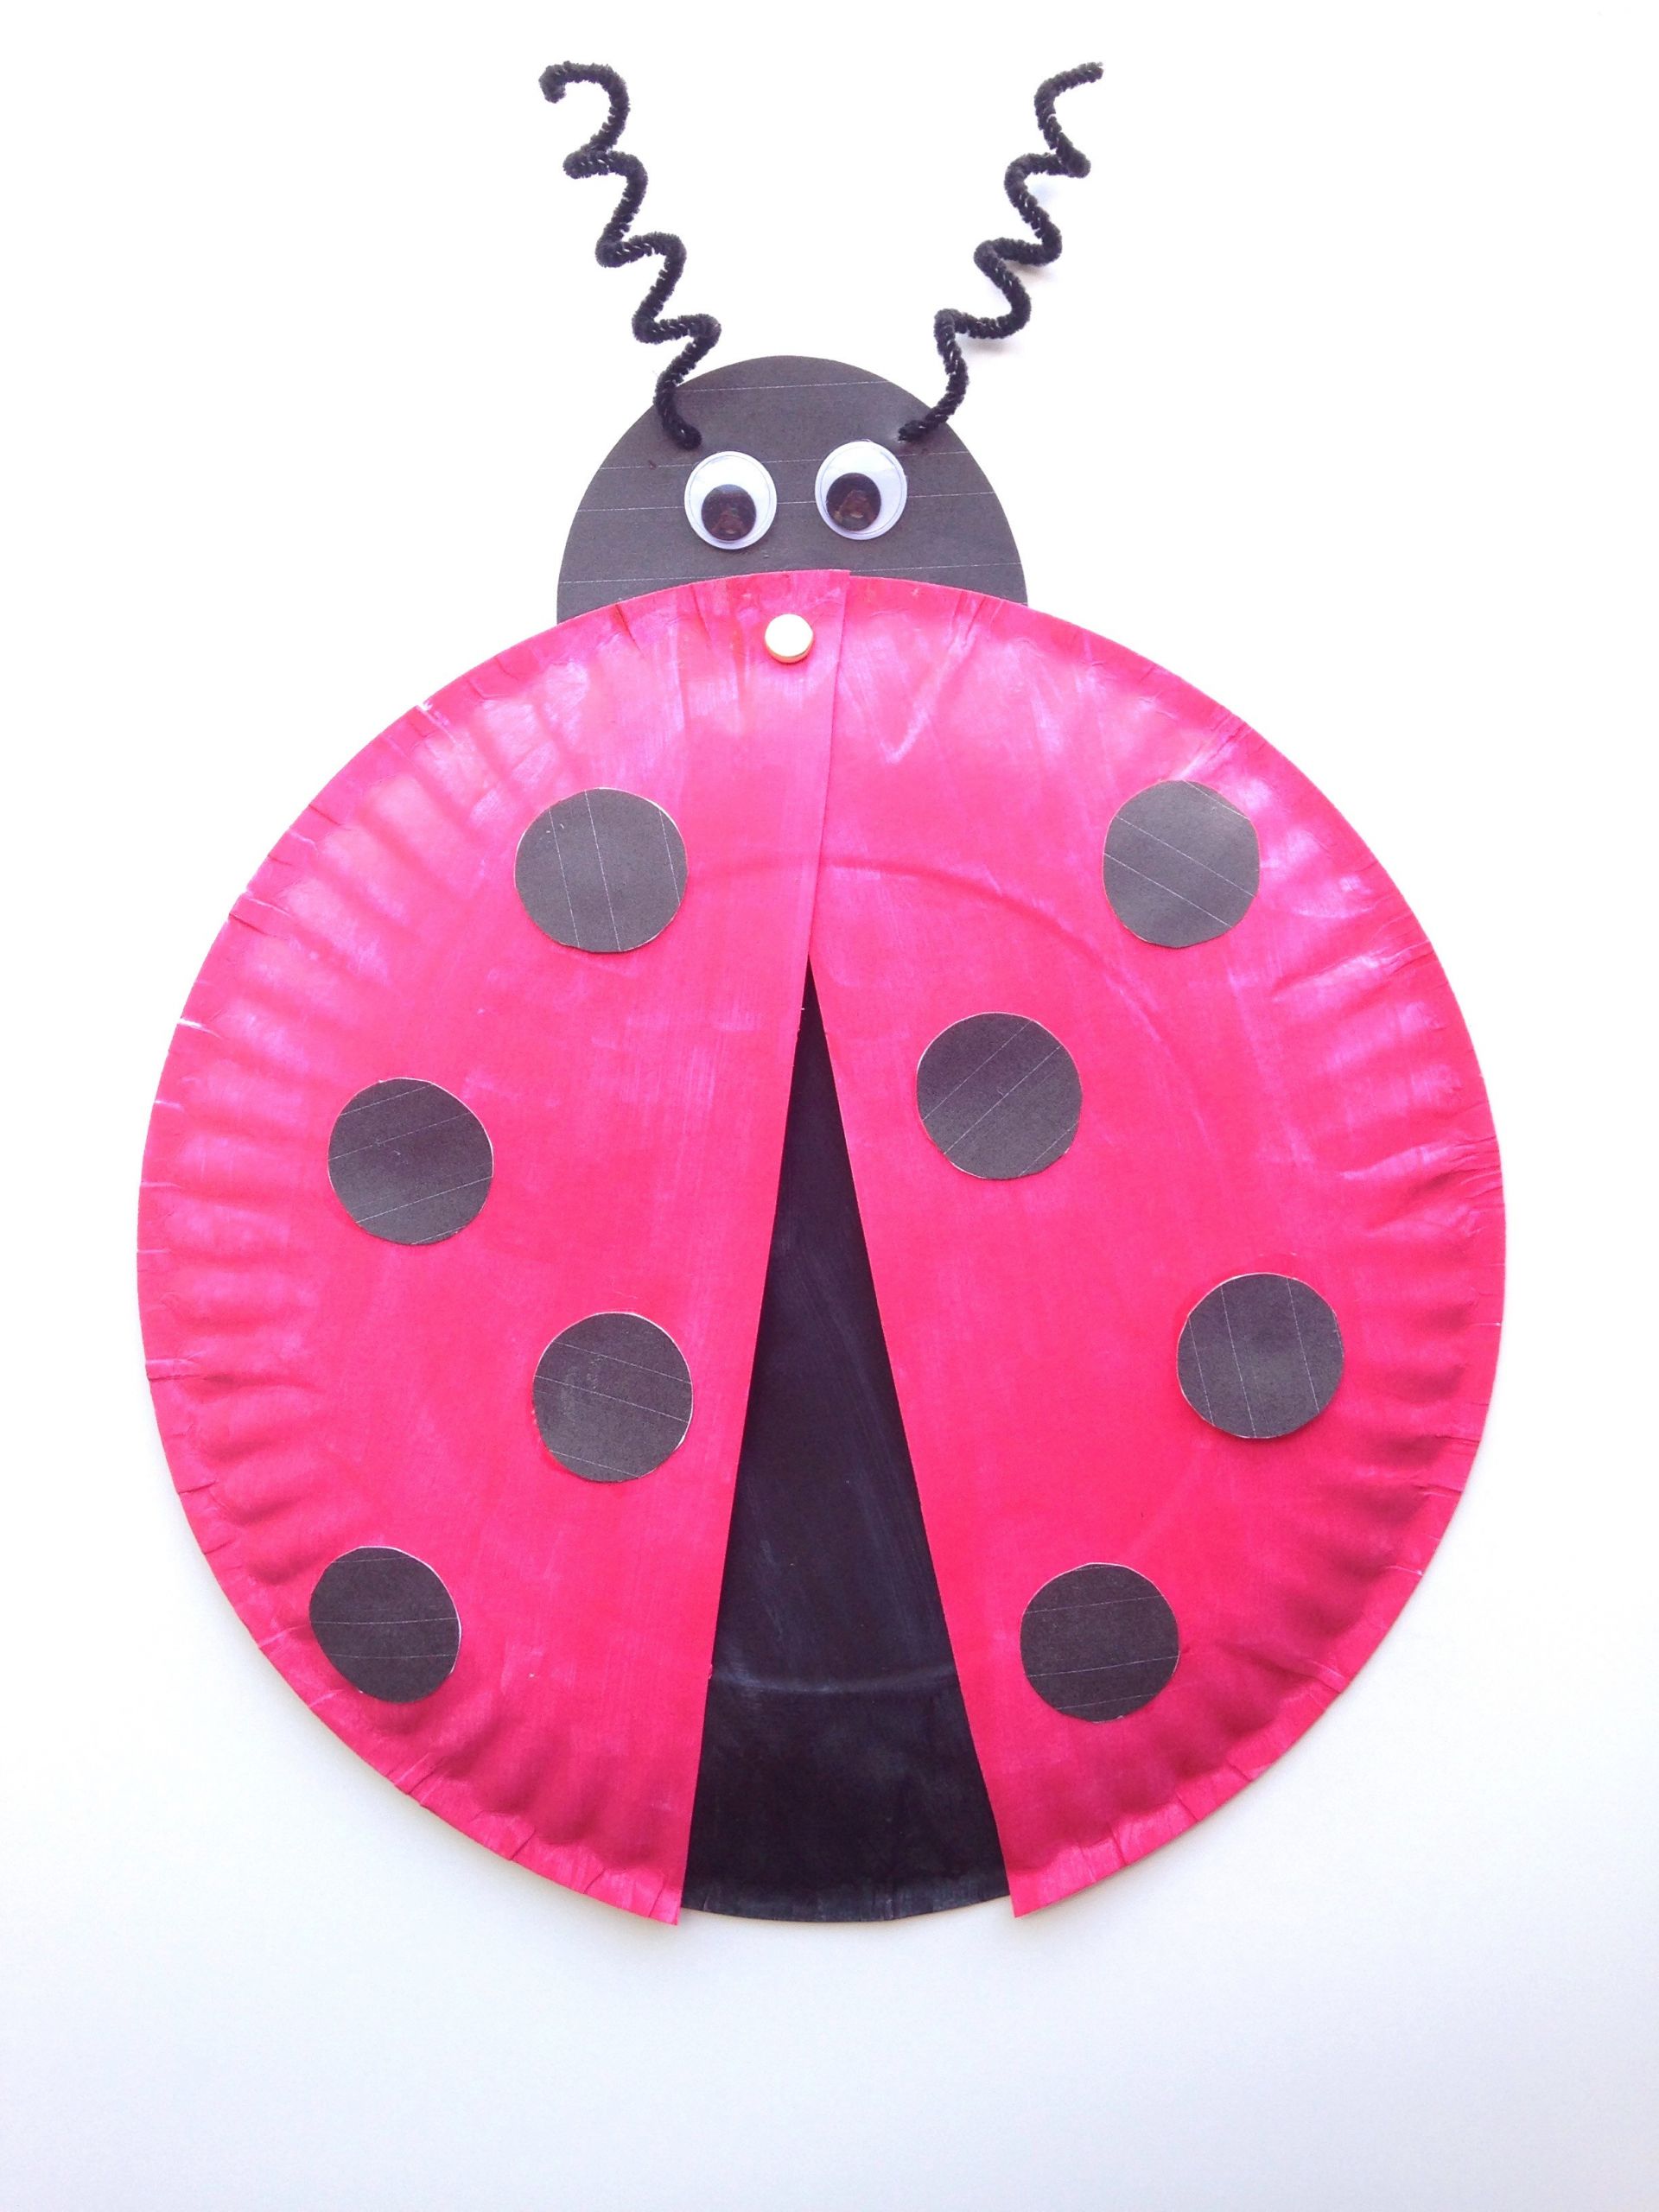 Arts And Crafts For Toddlers
 Ladybug Paper Plate Craft for Kids Free Printable